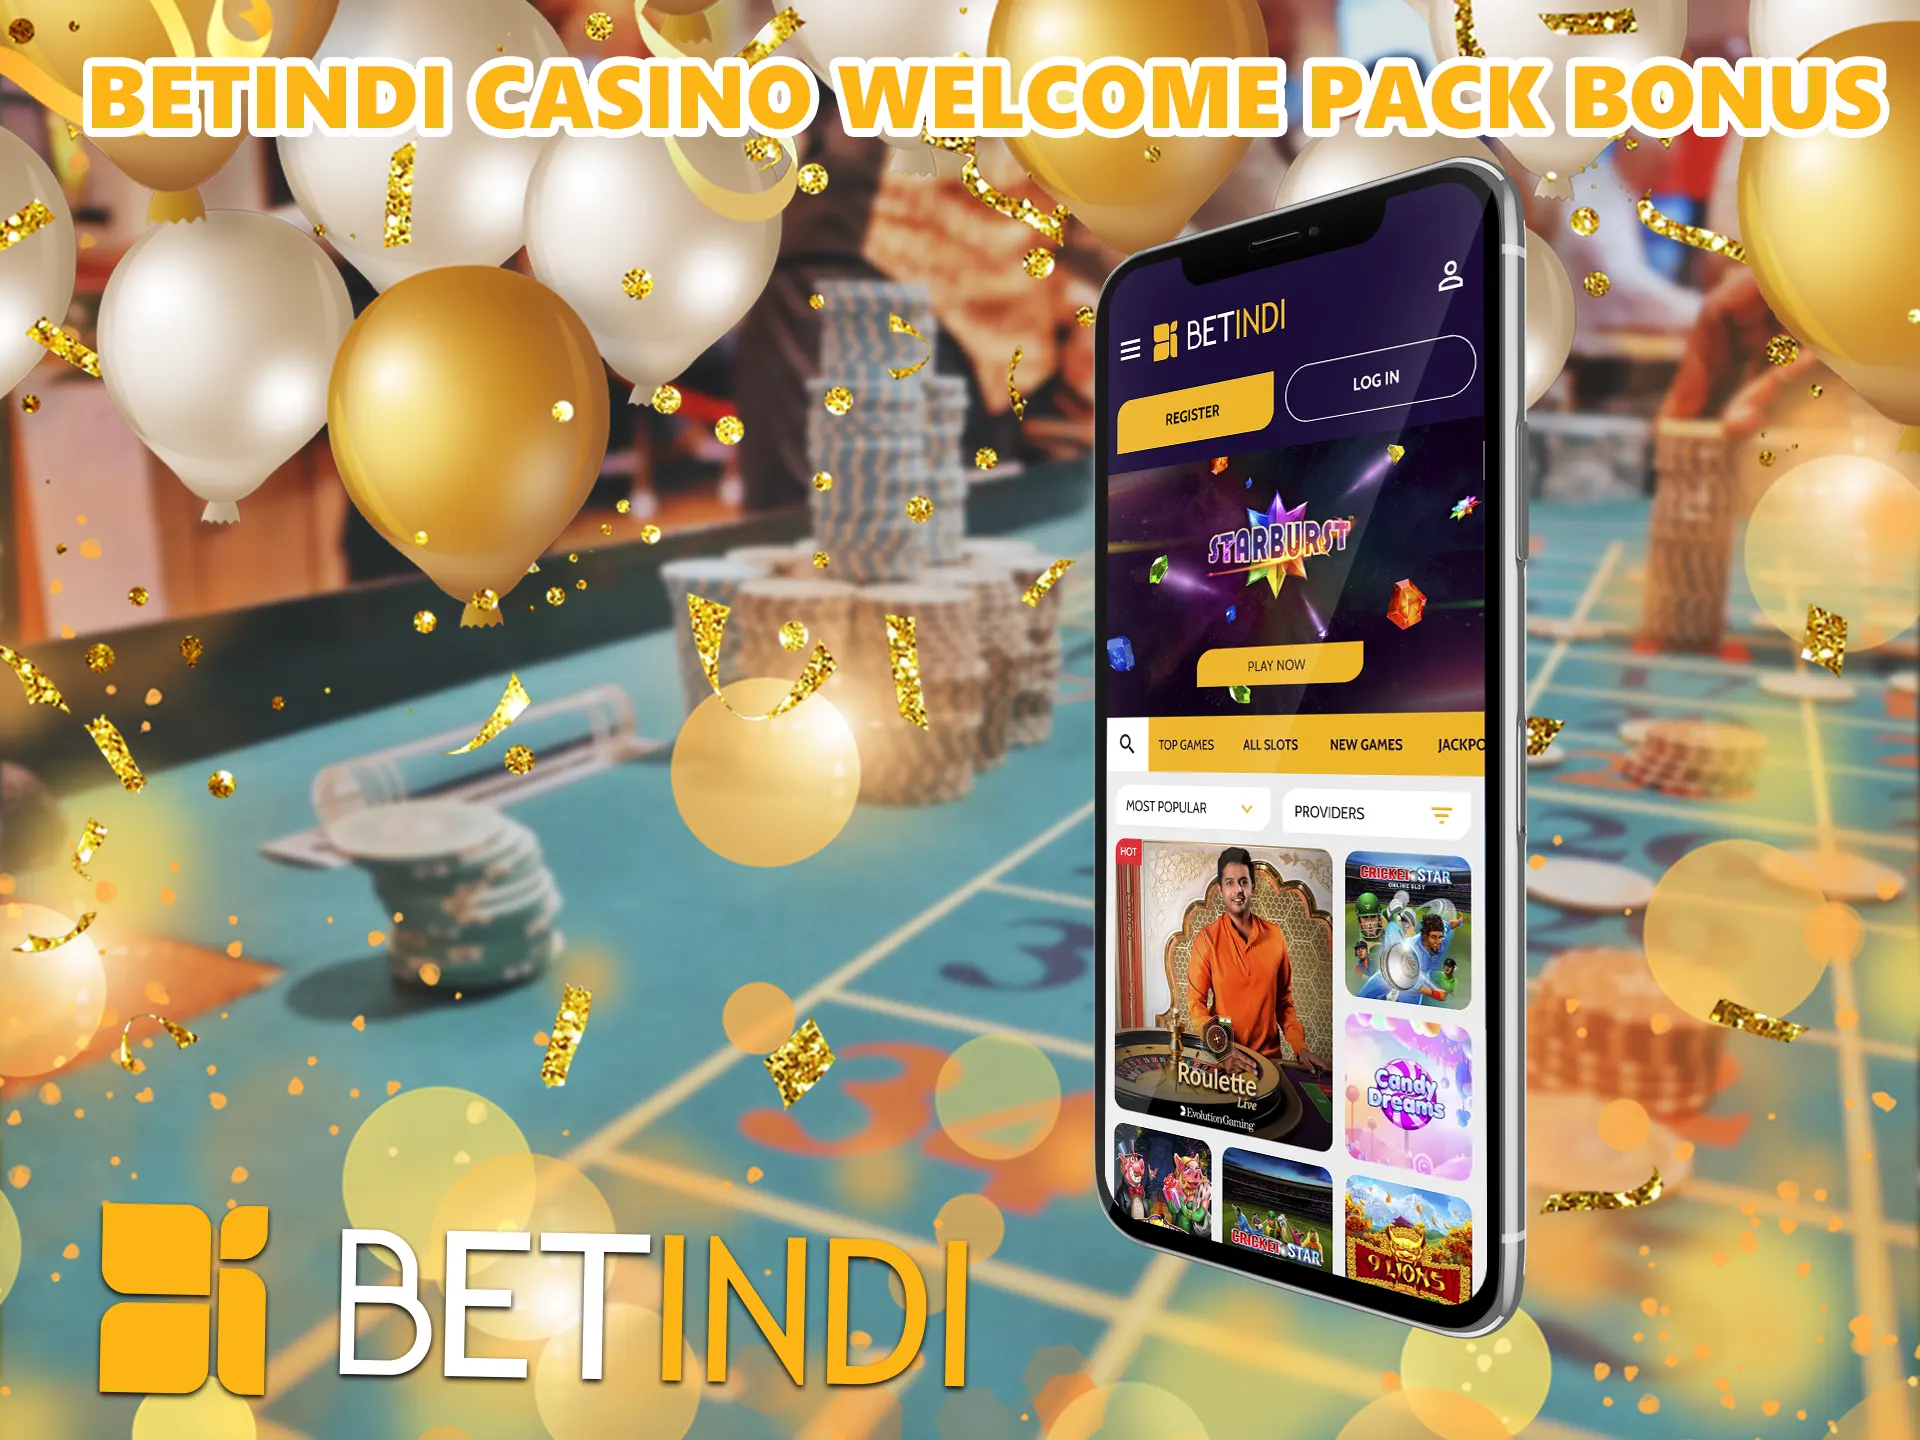 At BetIndi betting site you can get a +100% deposit bonus up to INR 50,000 you can use for gambling.